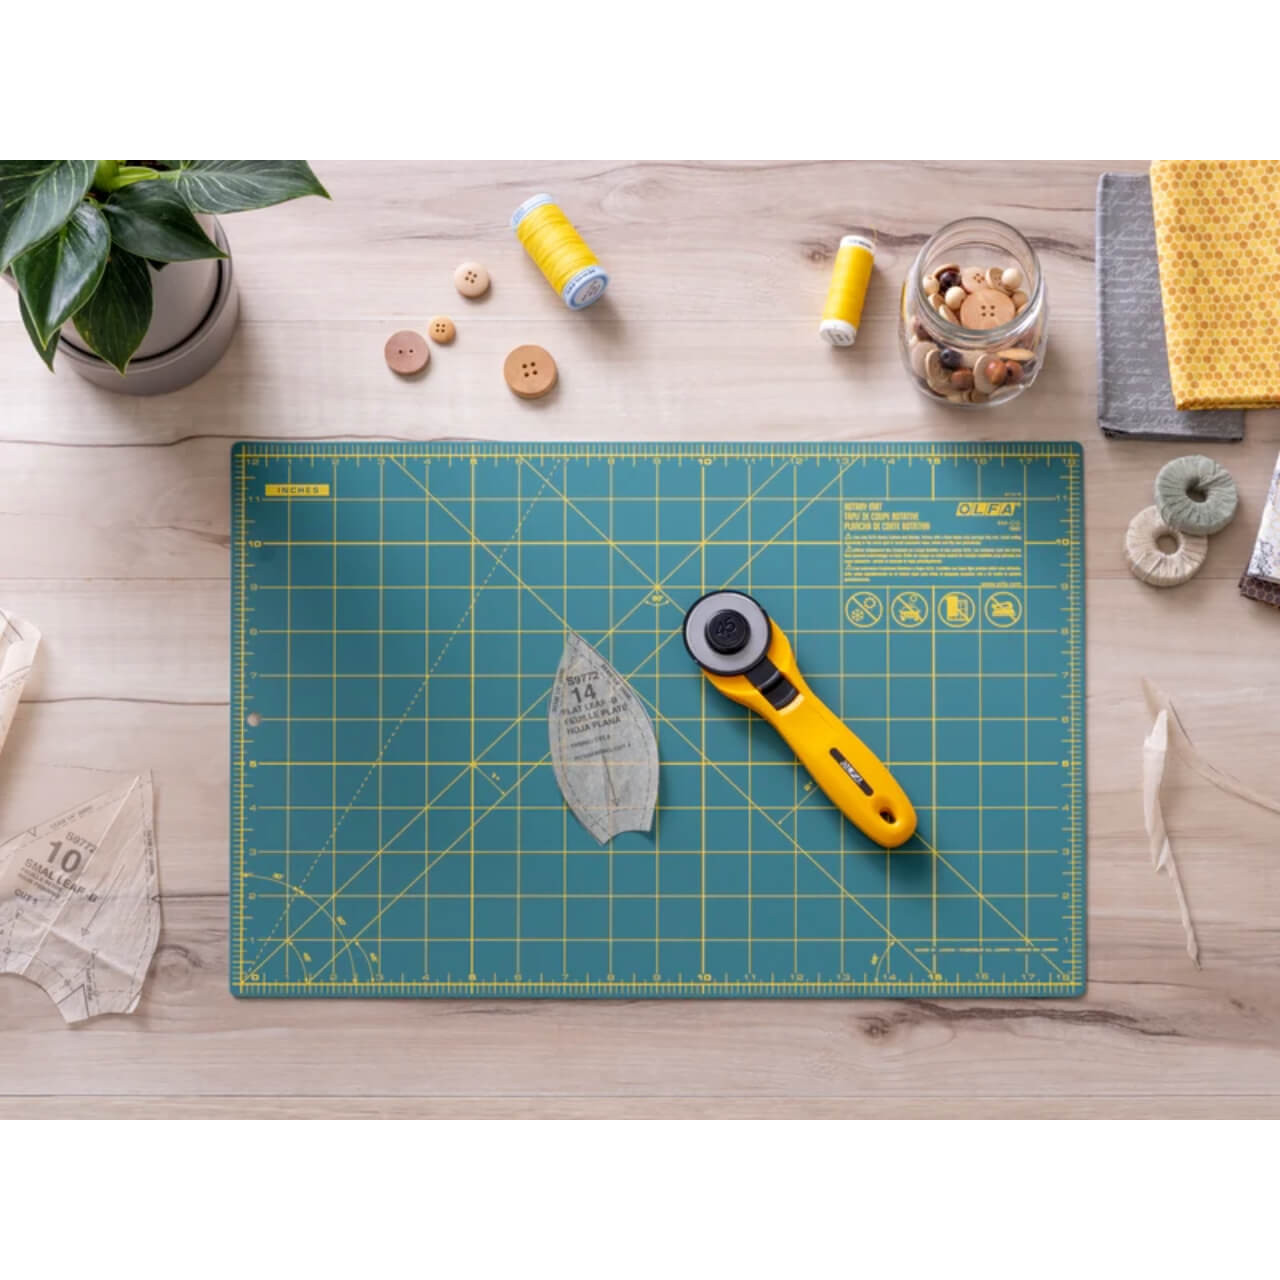 The image depicts a crafting scene on a wooden surface, featuring an OLFA green double-sided rotary mat with yellow grid lines and measurements. Centred on the mat is an OLFA rotary cutter with a vibrant yellow and black handle. The composition is enhanced by a patterned fabric piece, sewing threads in yellow and white, wooden buttons, and quilt patches, all neatly arranged around the mat, suggesting a peaceful quilting or crafting session.